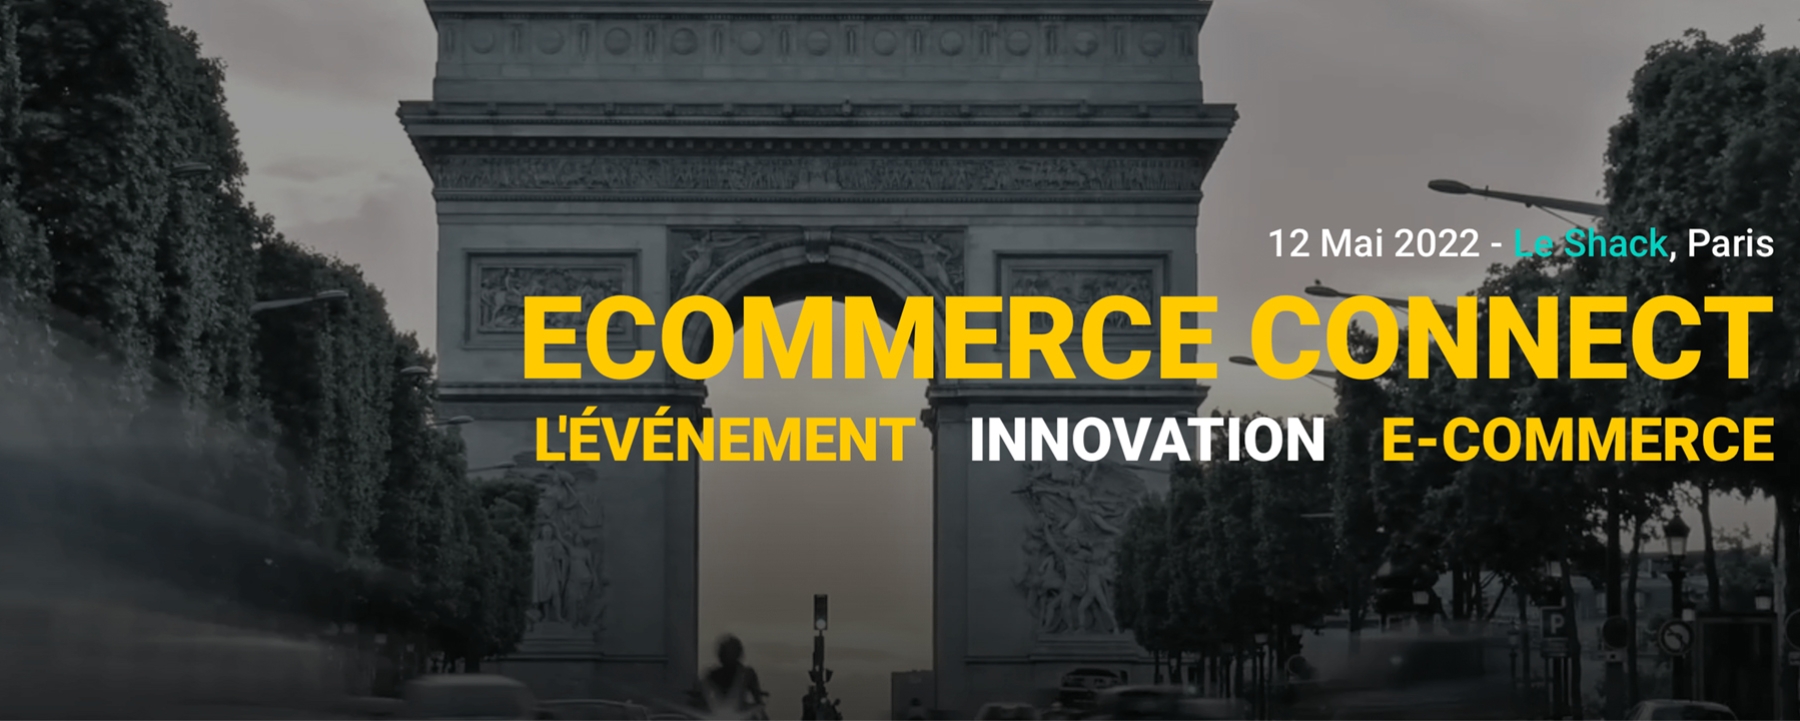 Ecommerce Connect 2022